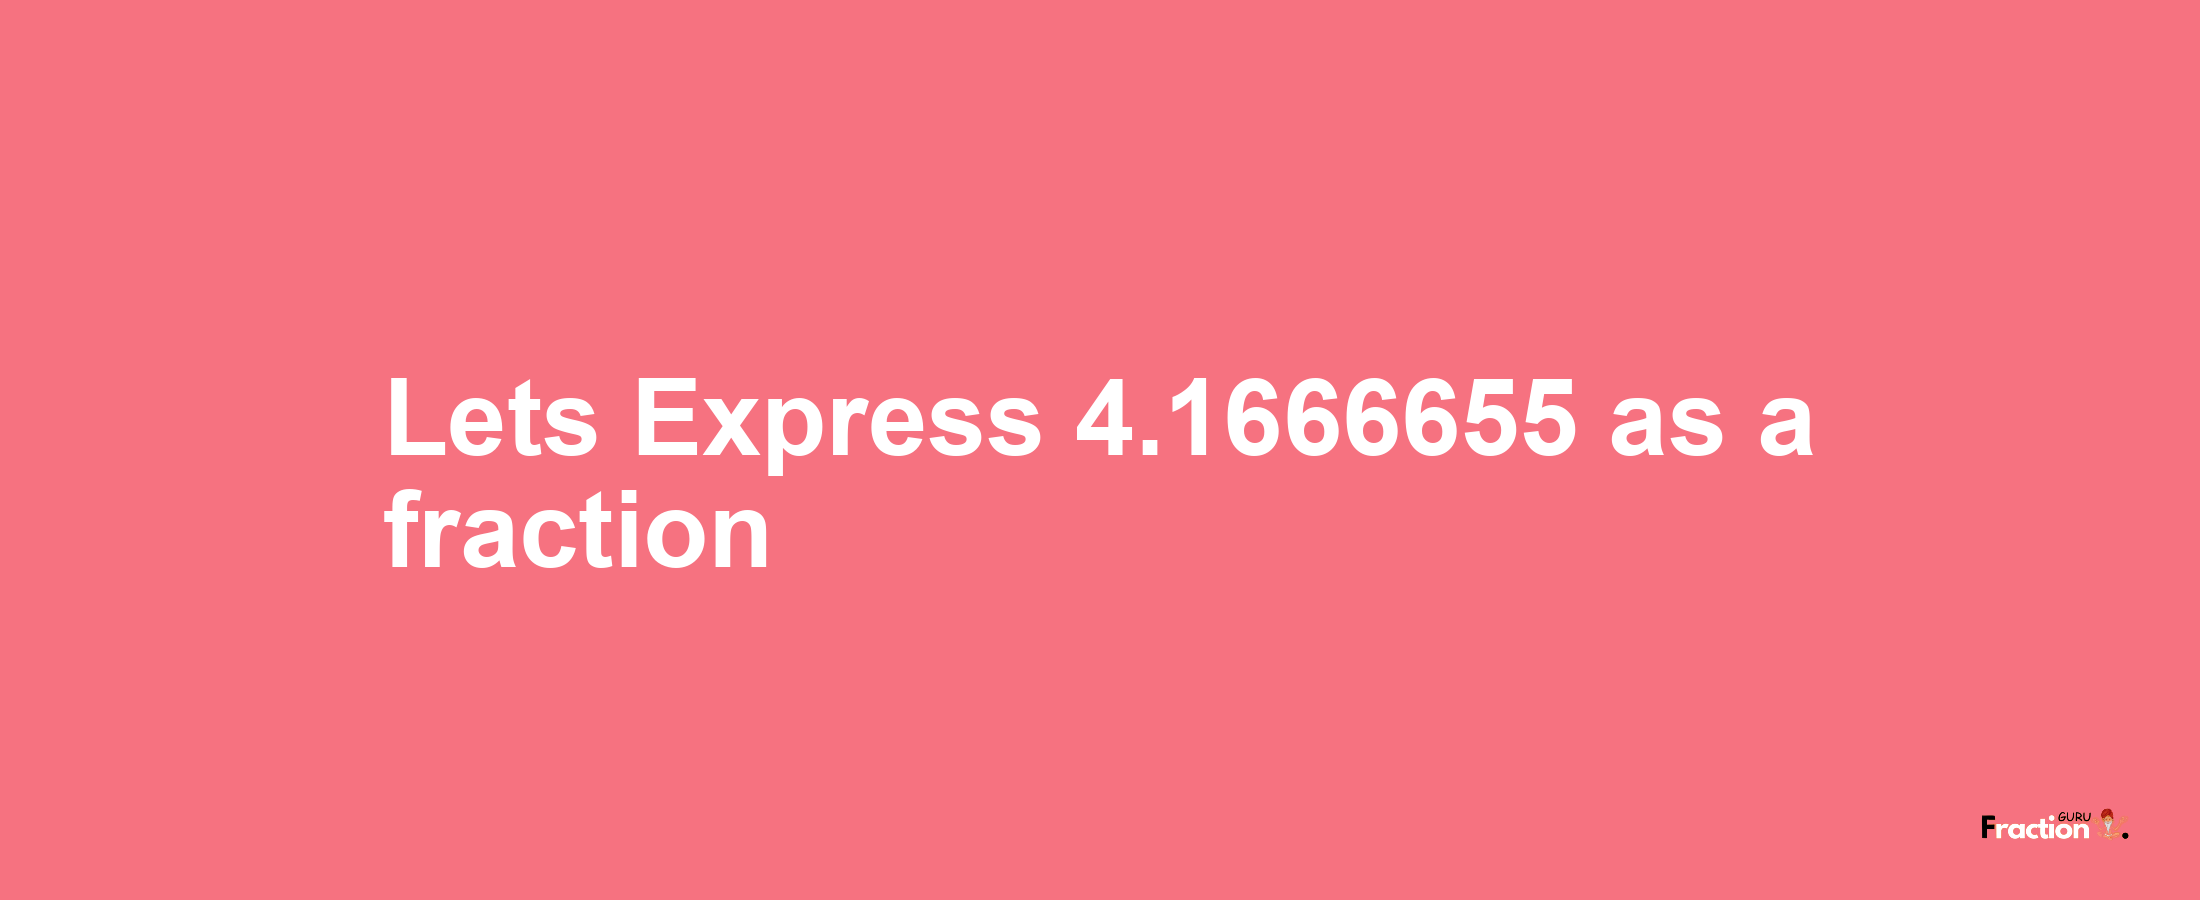 Lets Express 4.1666655 as afraction